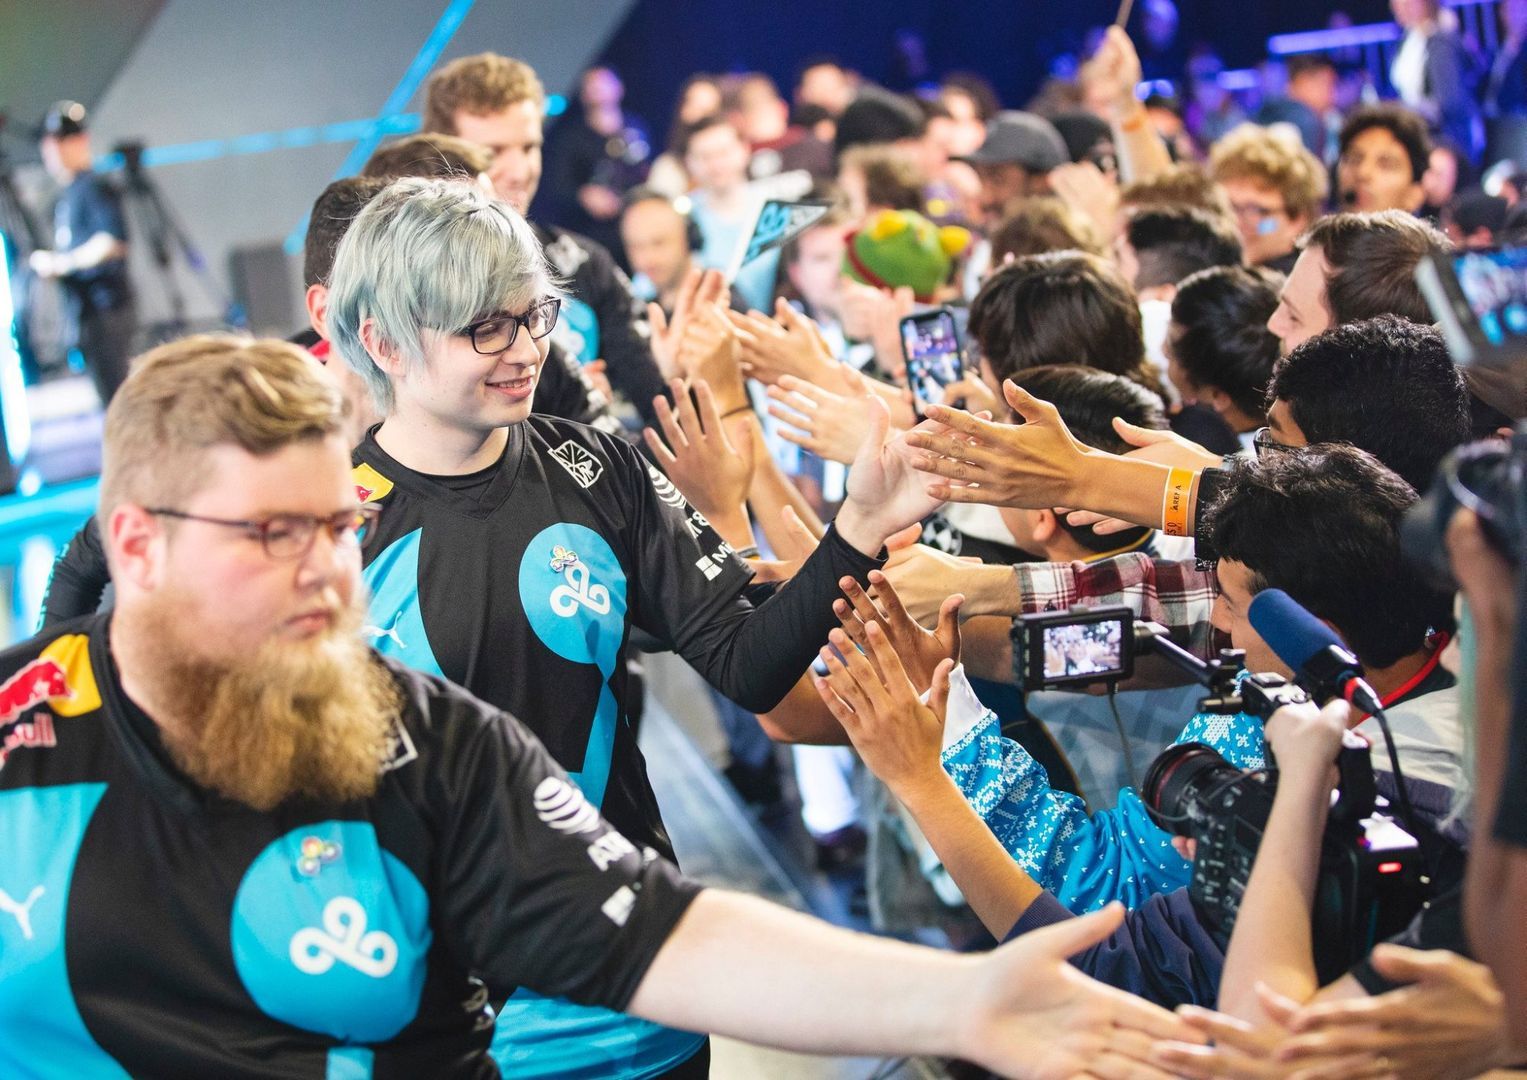 These six teams will face each other at the NA LCS Summer Split